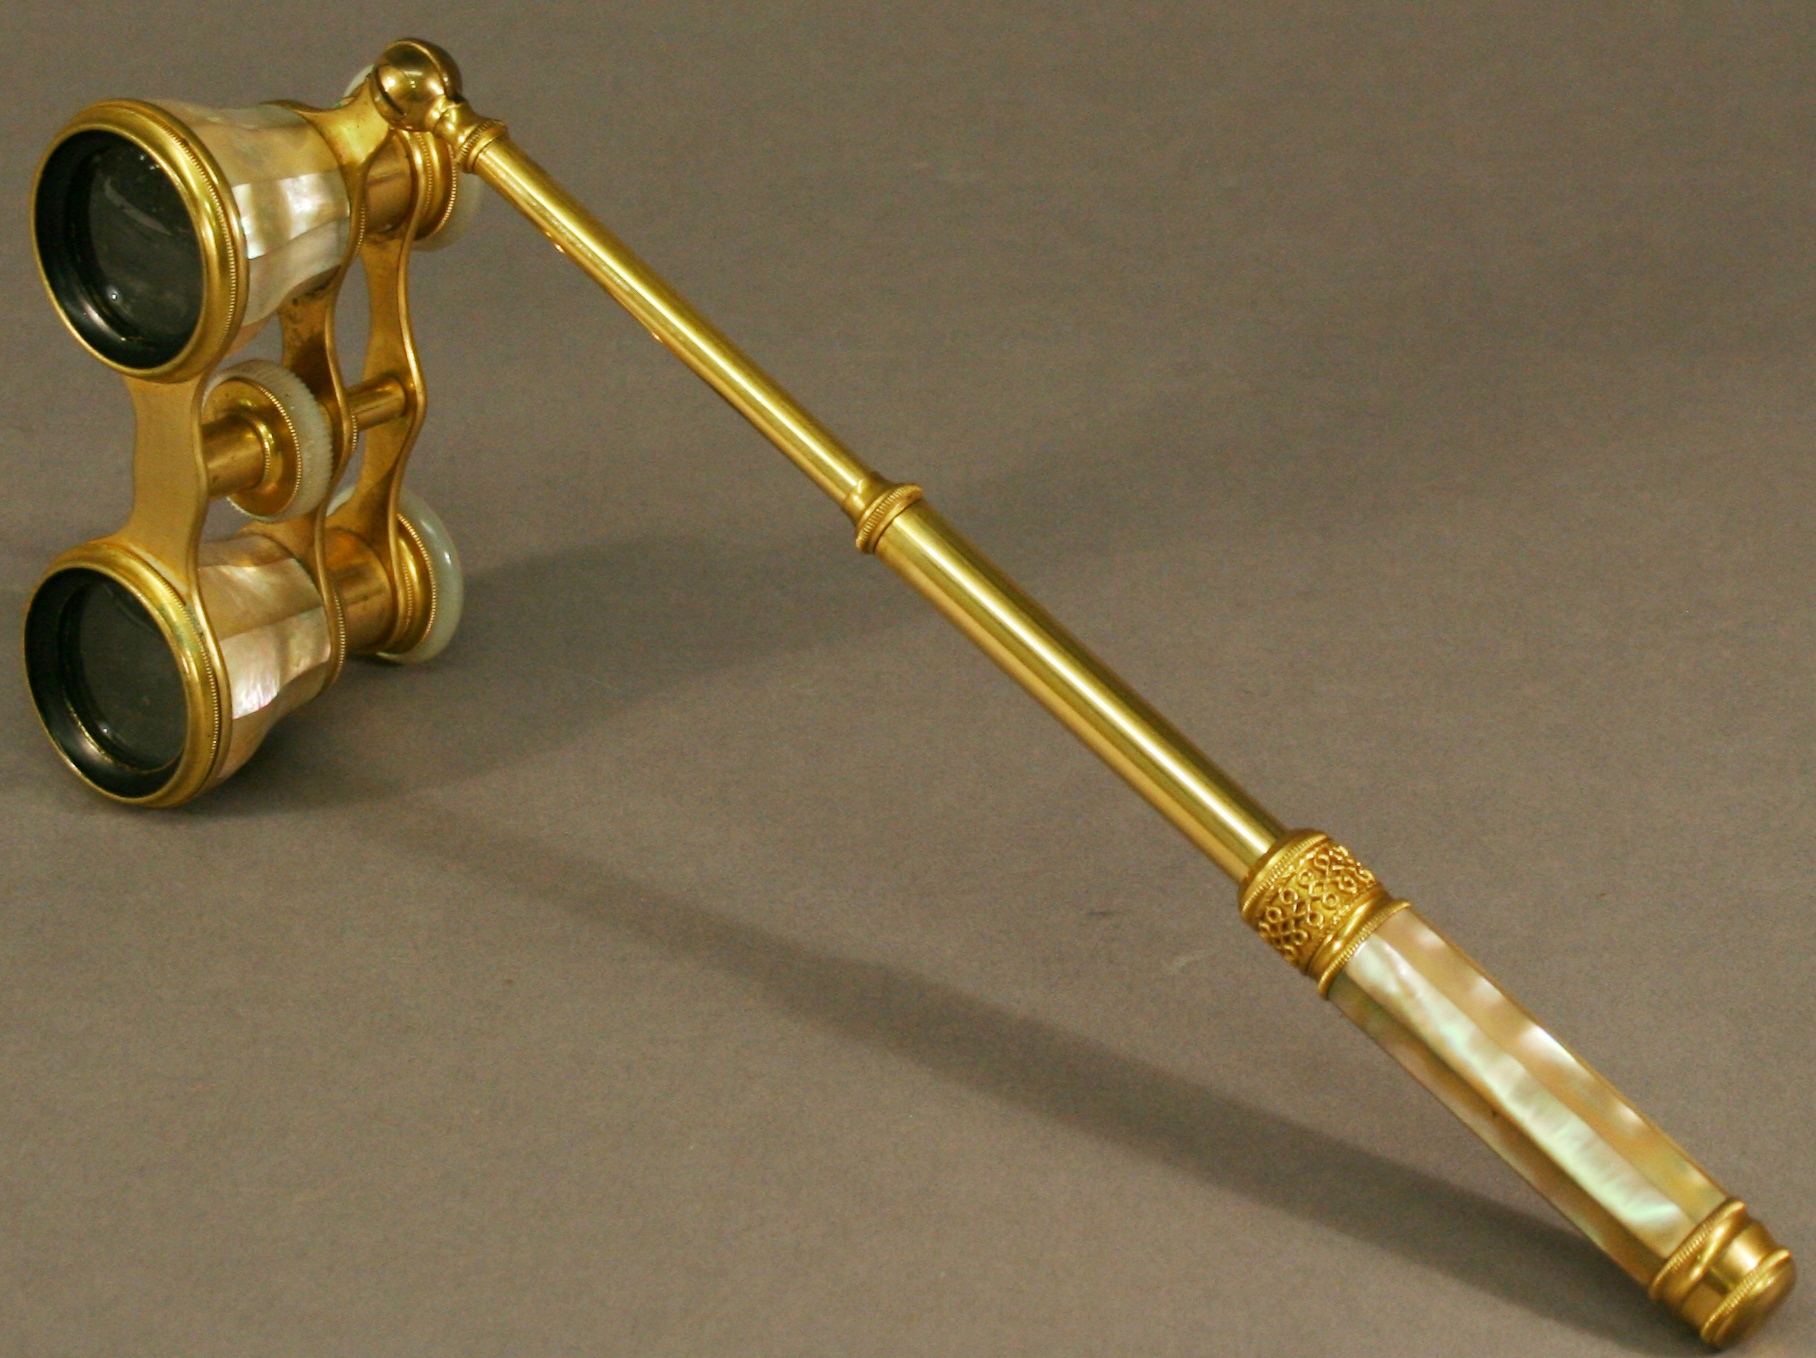 A PAIR OF FRENCH GILT-METAL AND MOTHER-OF-PEARL OPERA GLASSES by Lefils, Paris, of typical form - Image 2 of 2